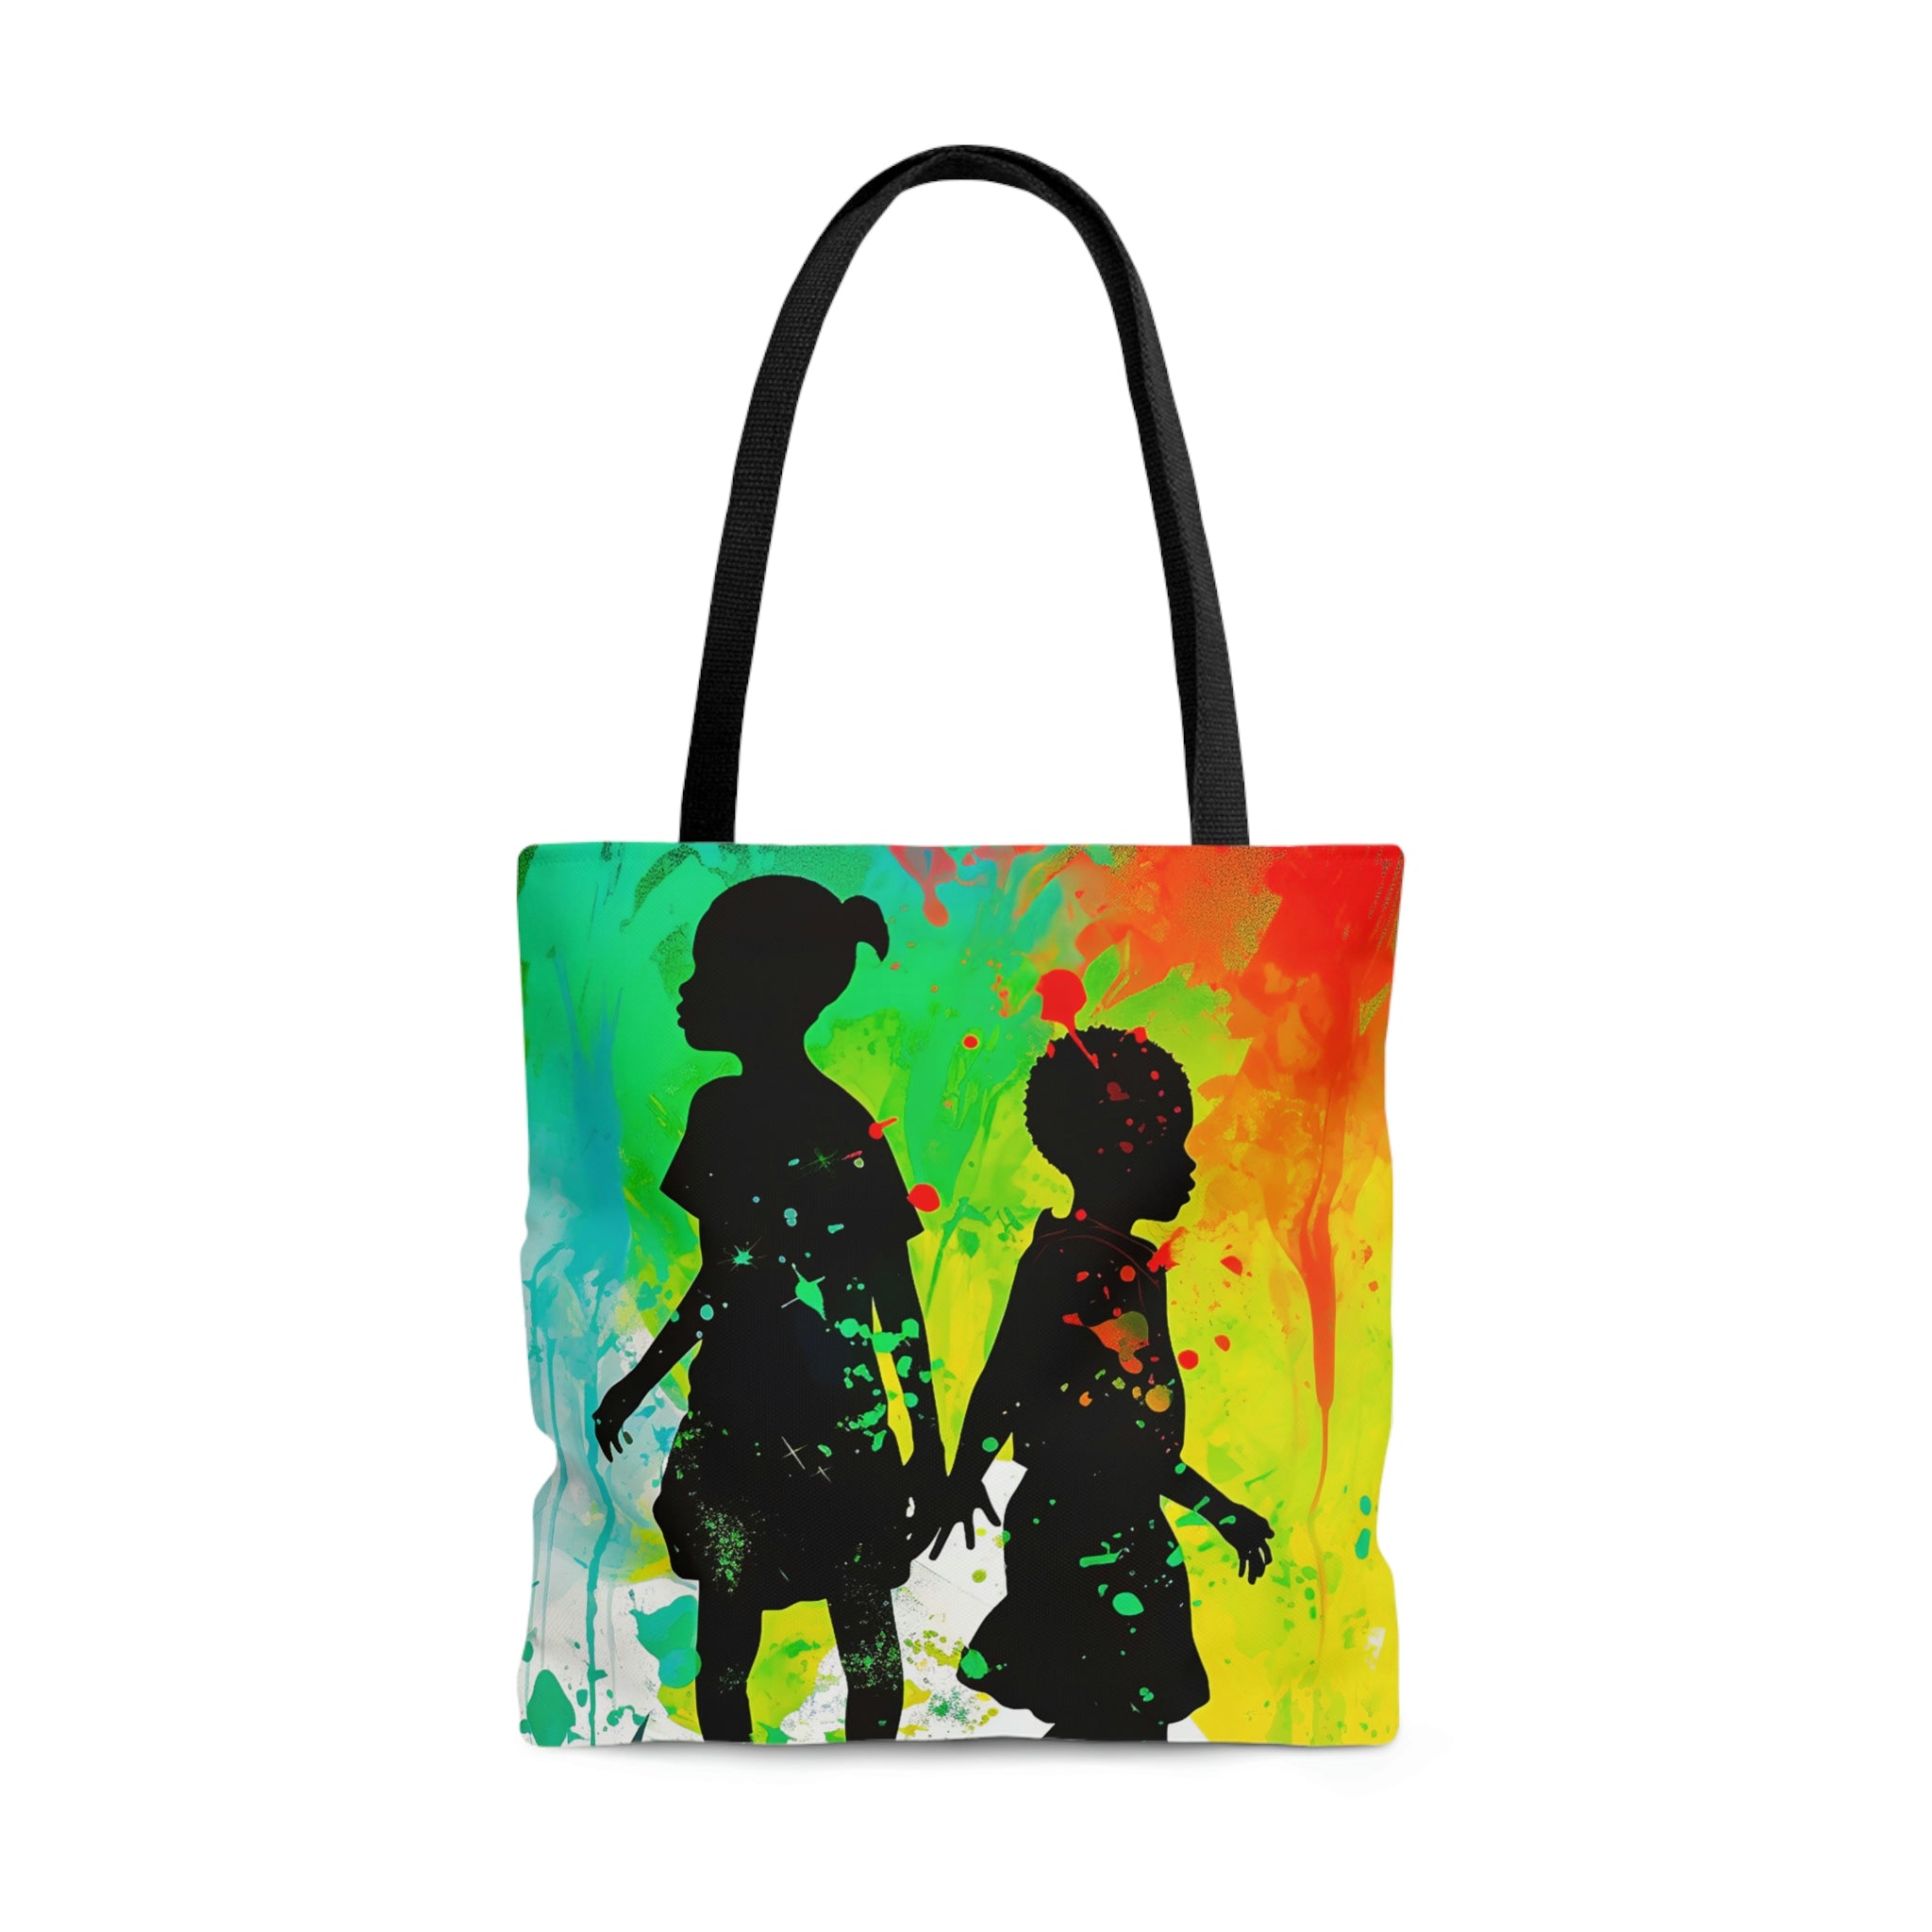 "SISTERS PLAYING" - LIBERATION THEMED TOTE